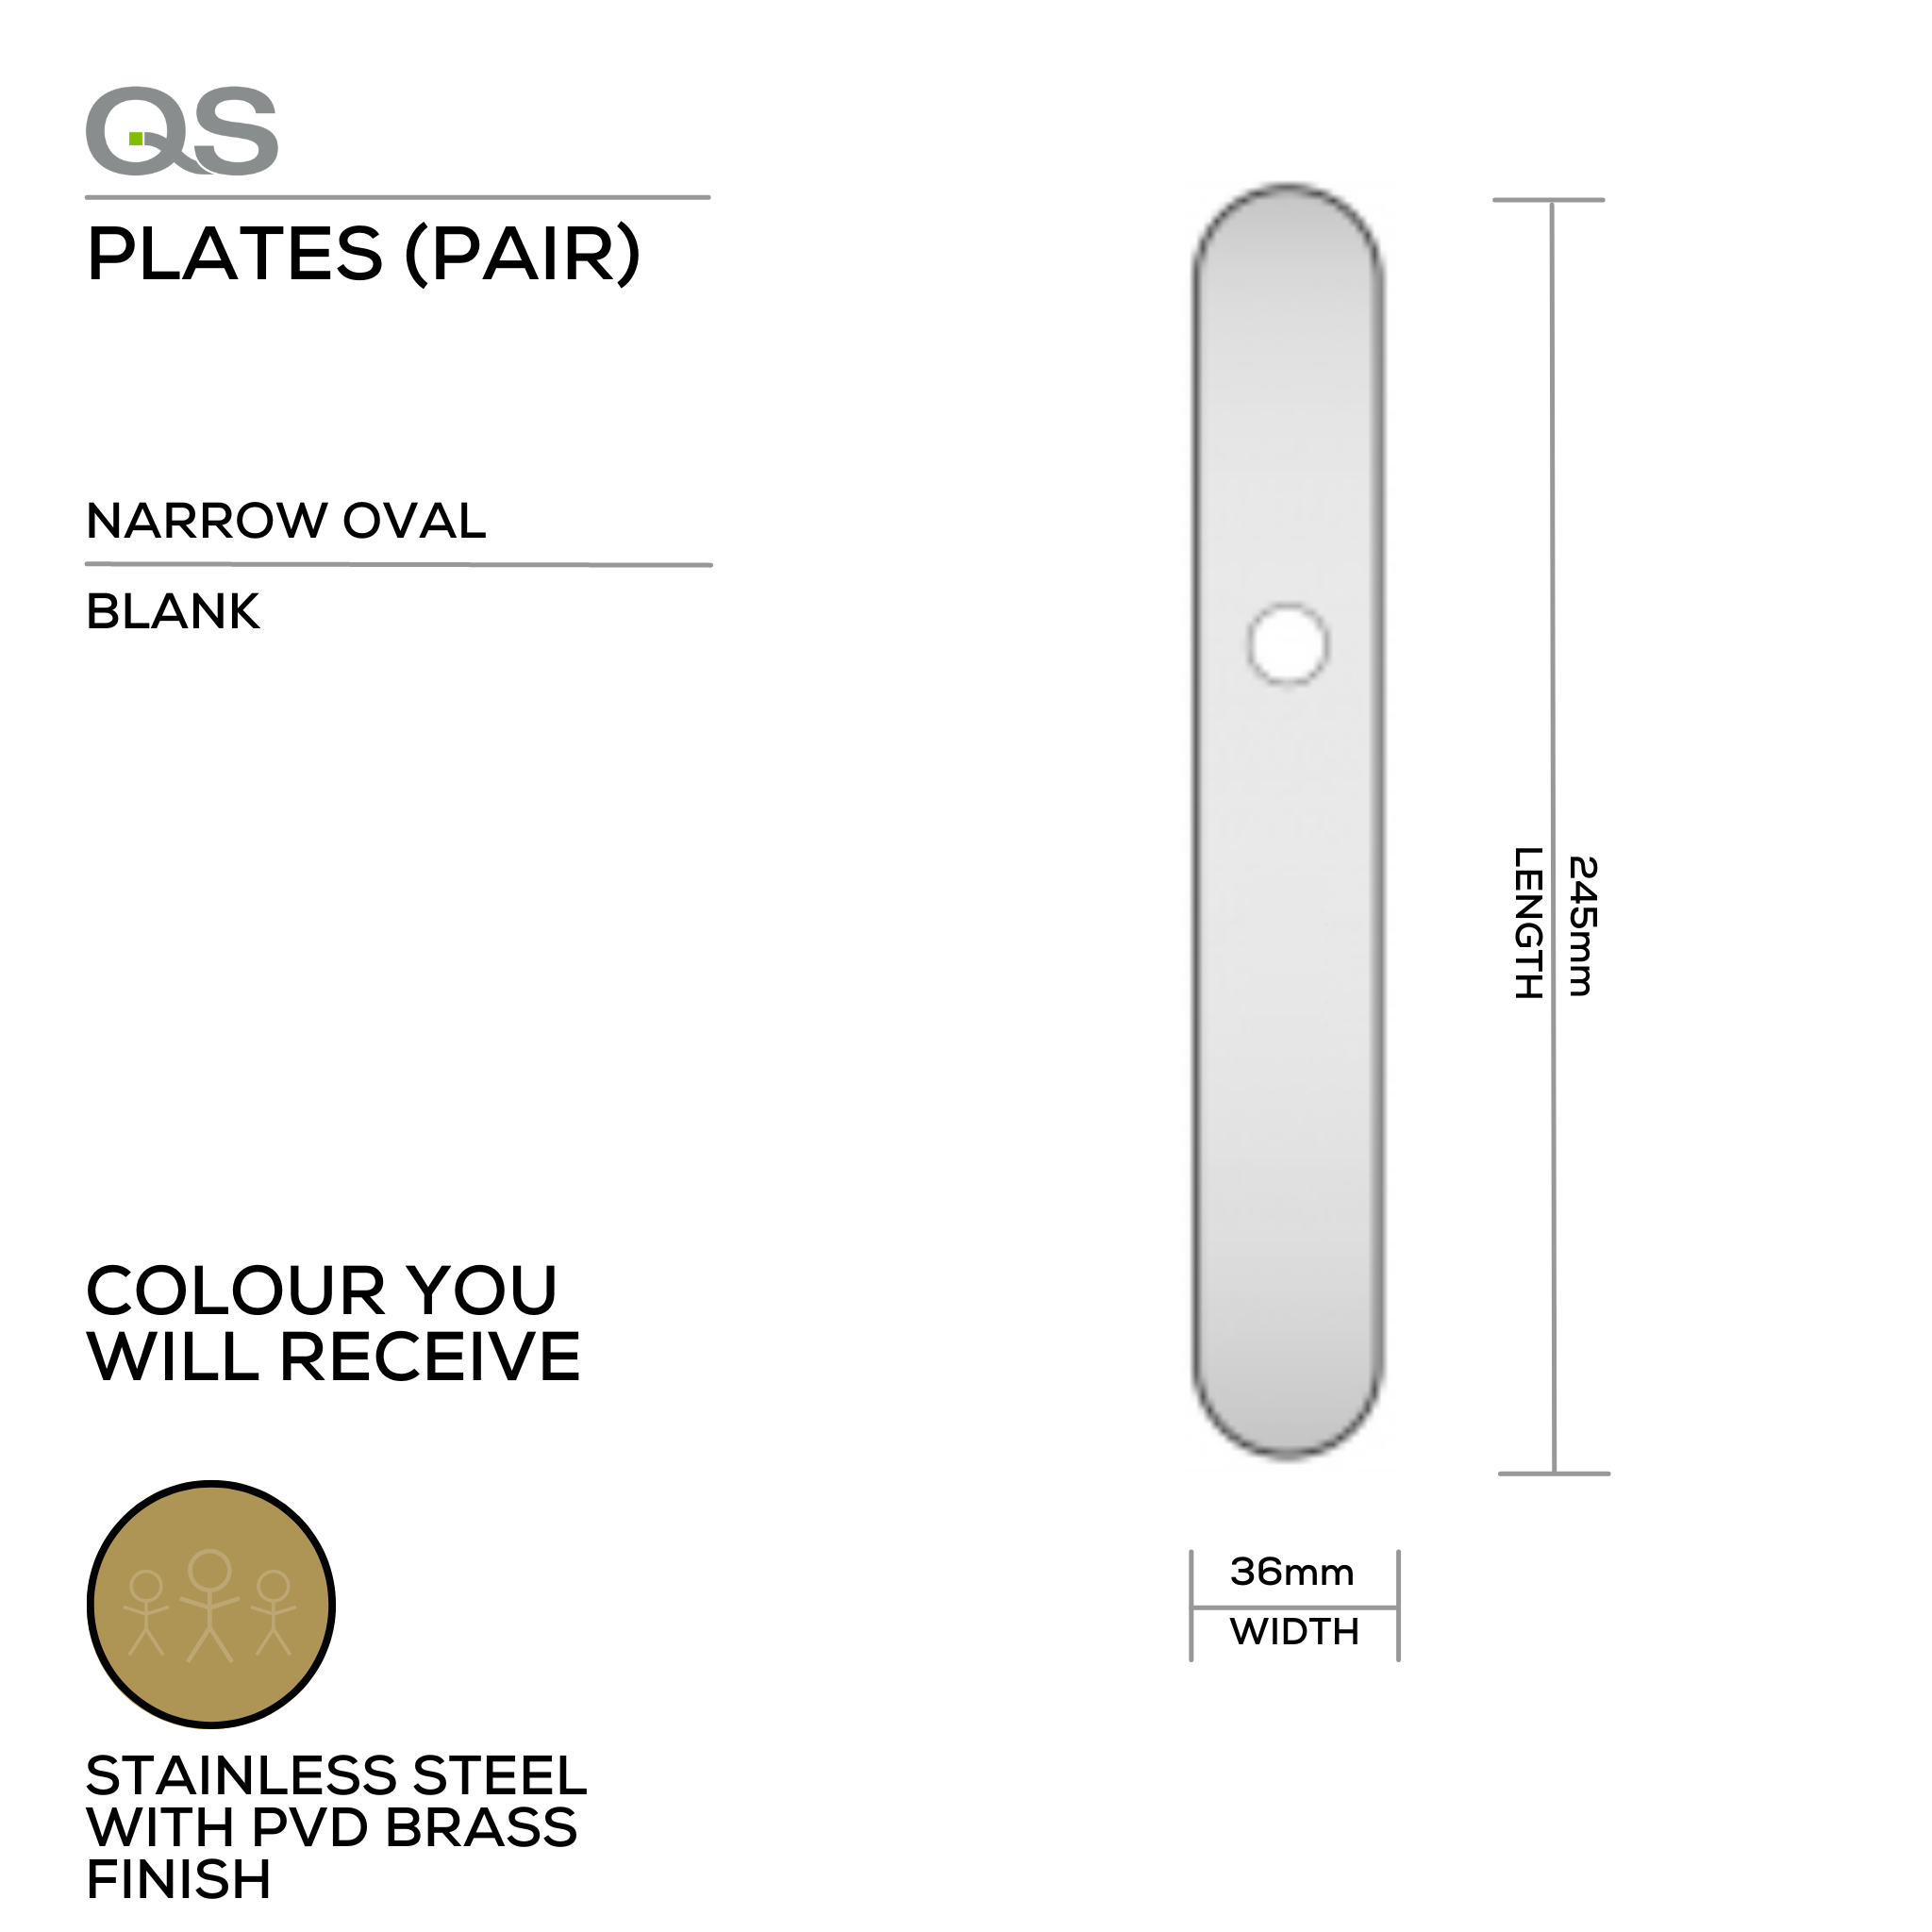 QS4483 PVD BLANK, Plate, Blank, Narrow Oval, Supplied with QS Handle, PVD Brass, QS